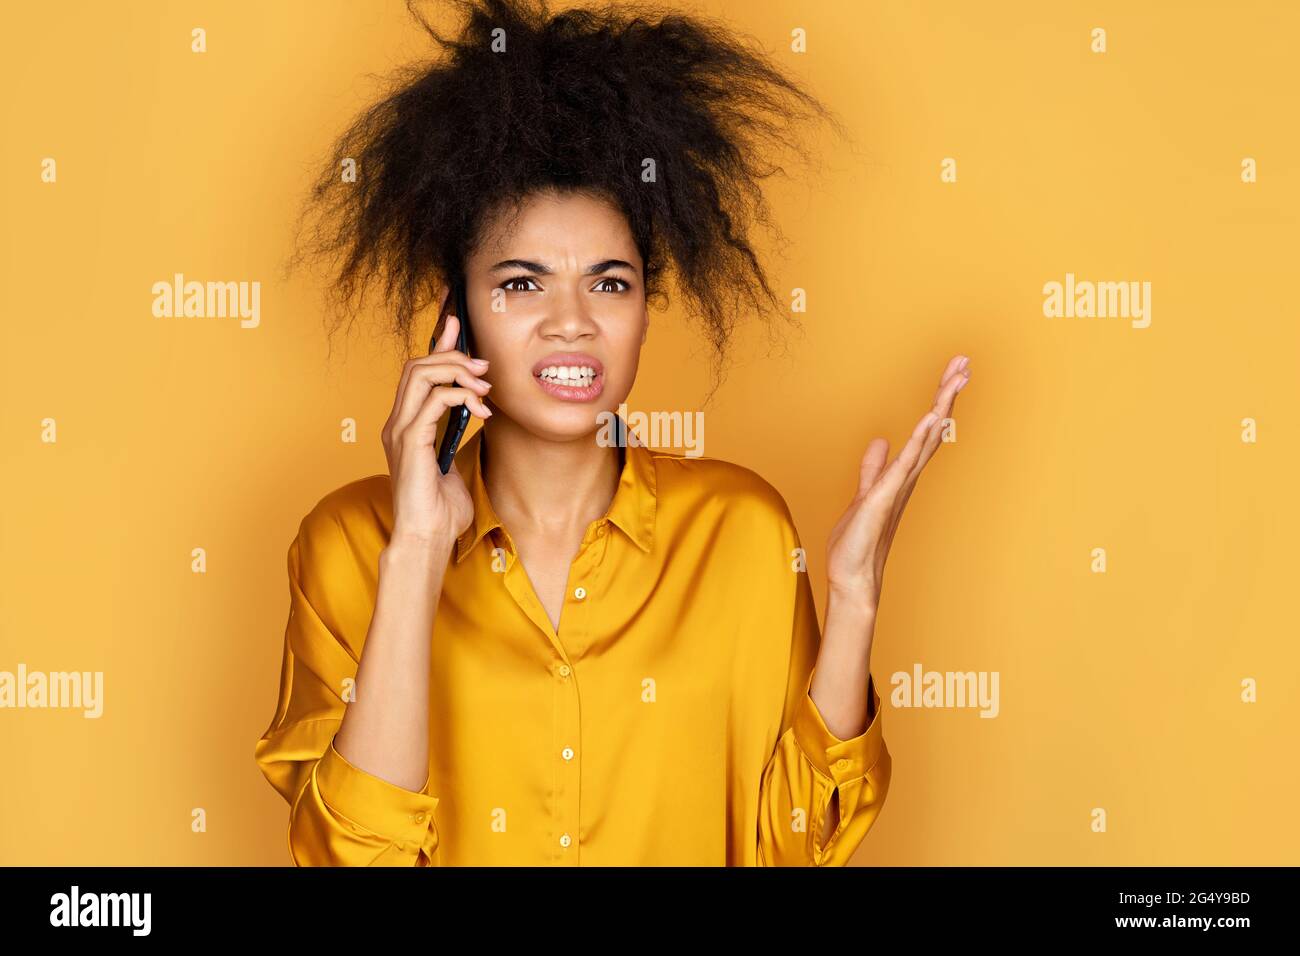 Angry girl talk on smartphone arguing or solving problem. Photo of african american girl on yellow background Stock Photo